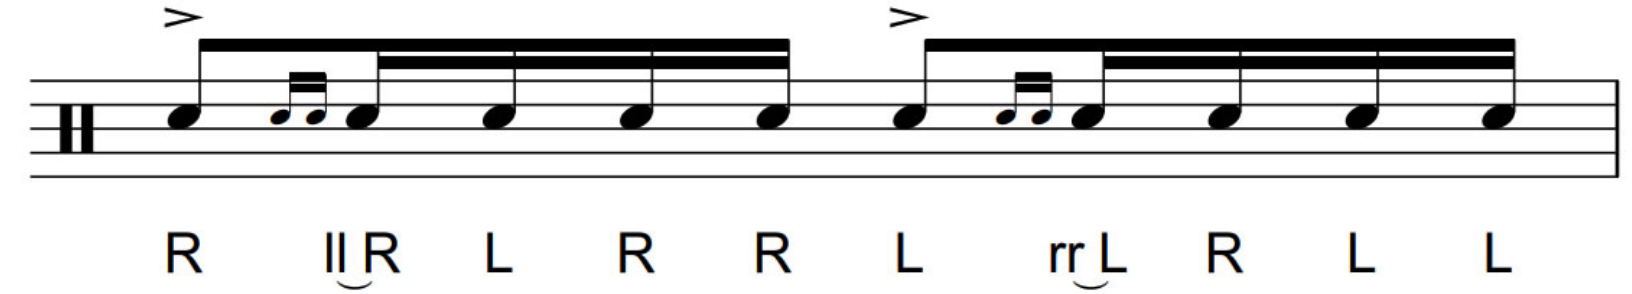 How to play the drag paradiddle #1 rudiment